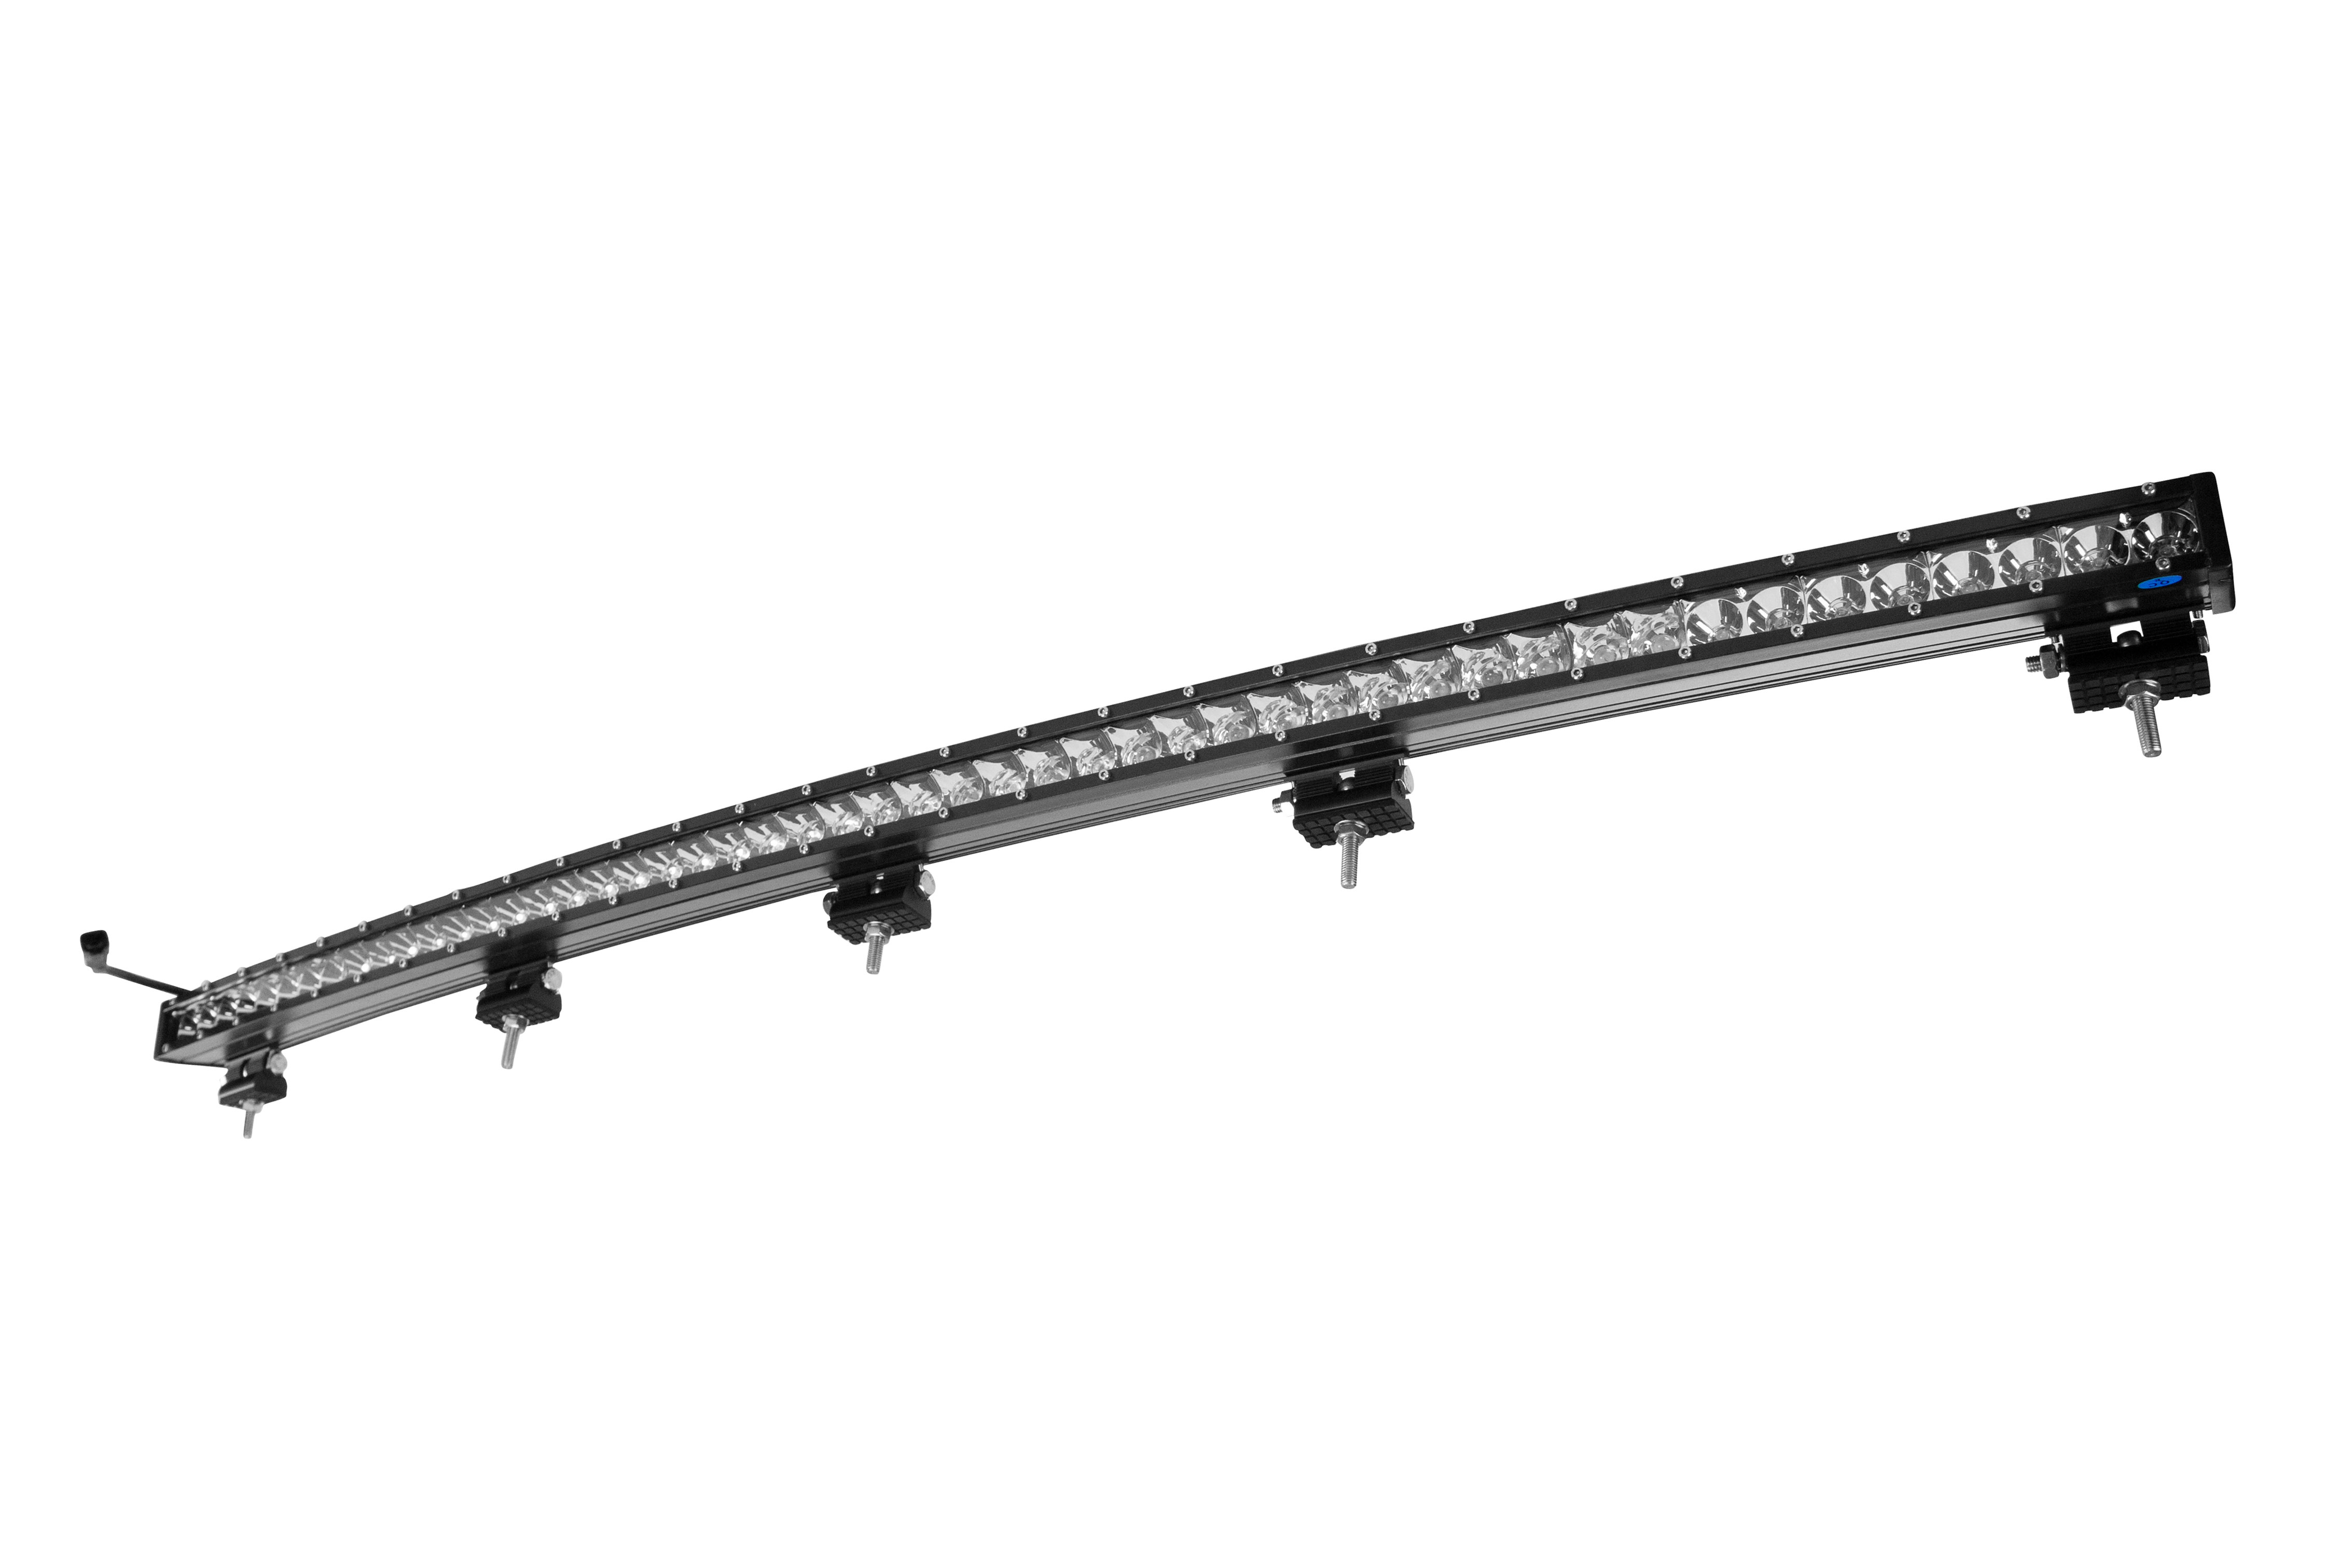 Larson Electronics Releases a New Line of Curved LED Light Bars just in time for the Cooler Weather